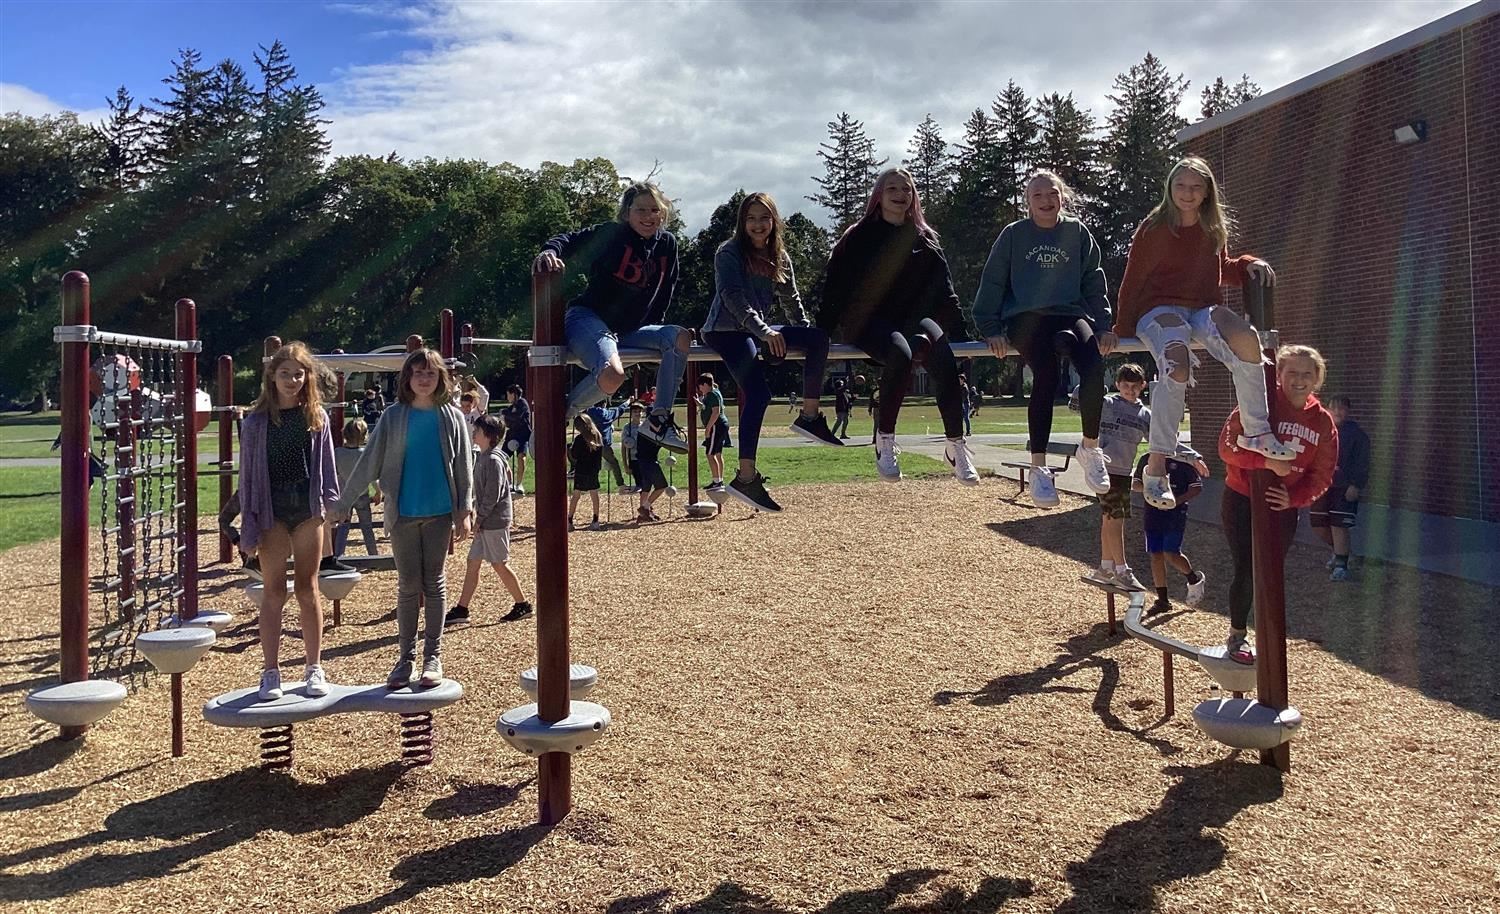  Students stand and sit atop the new playground equipment.